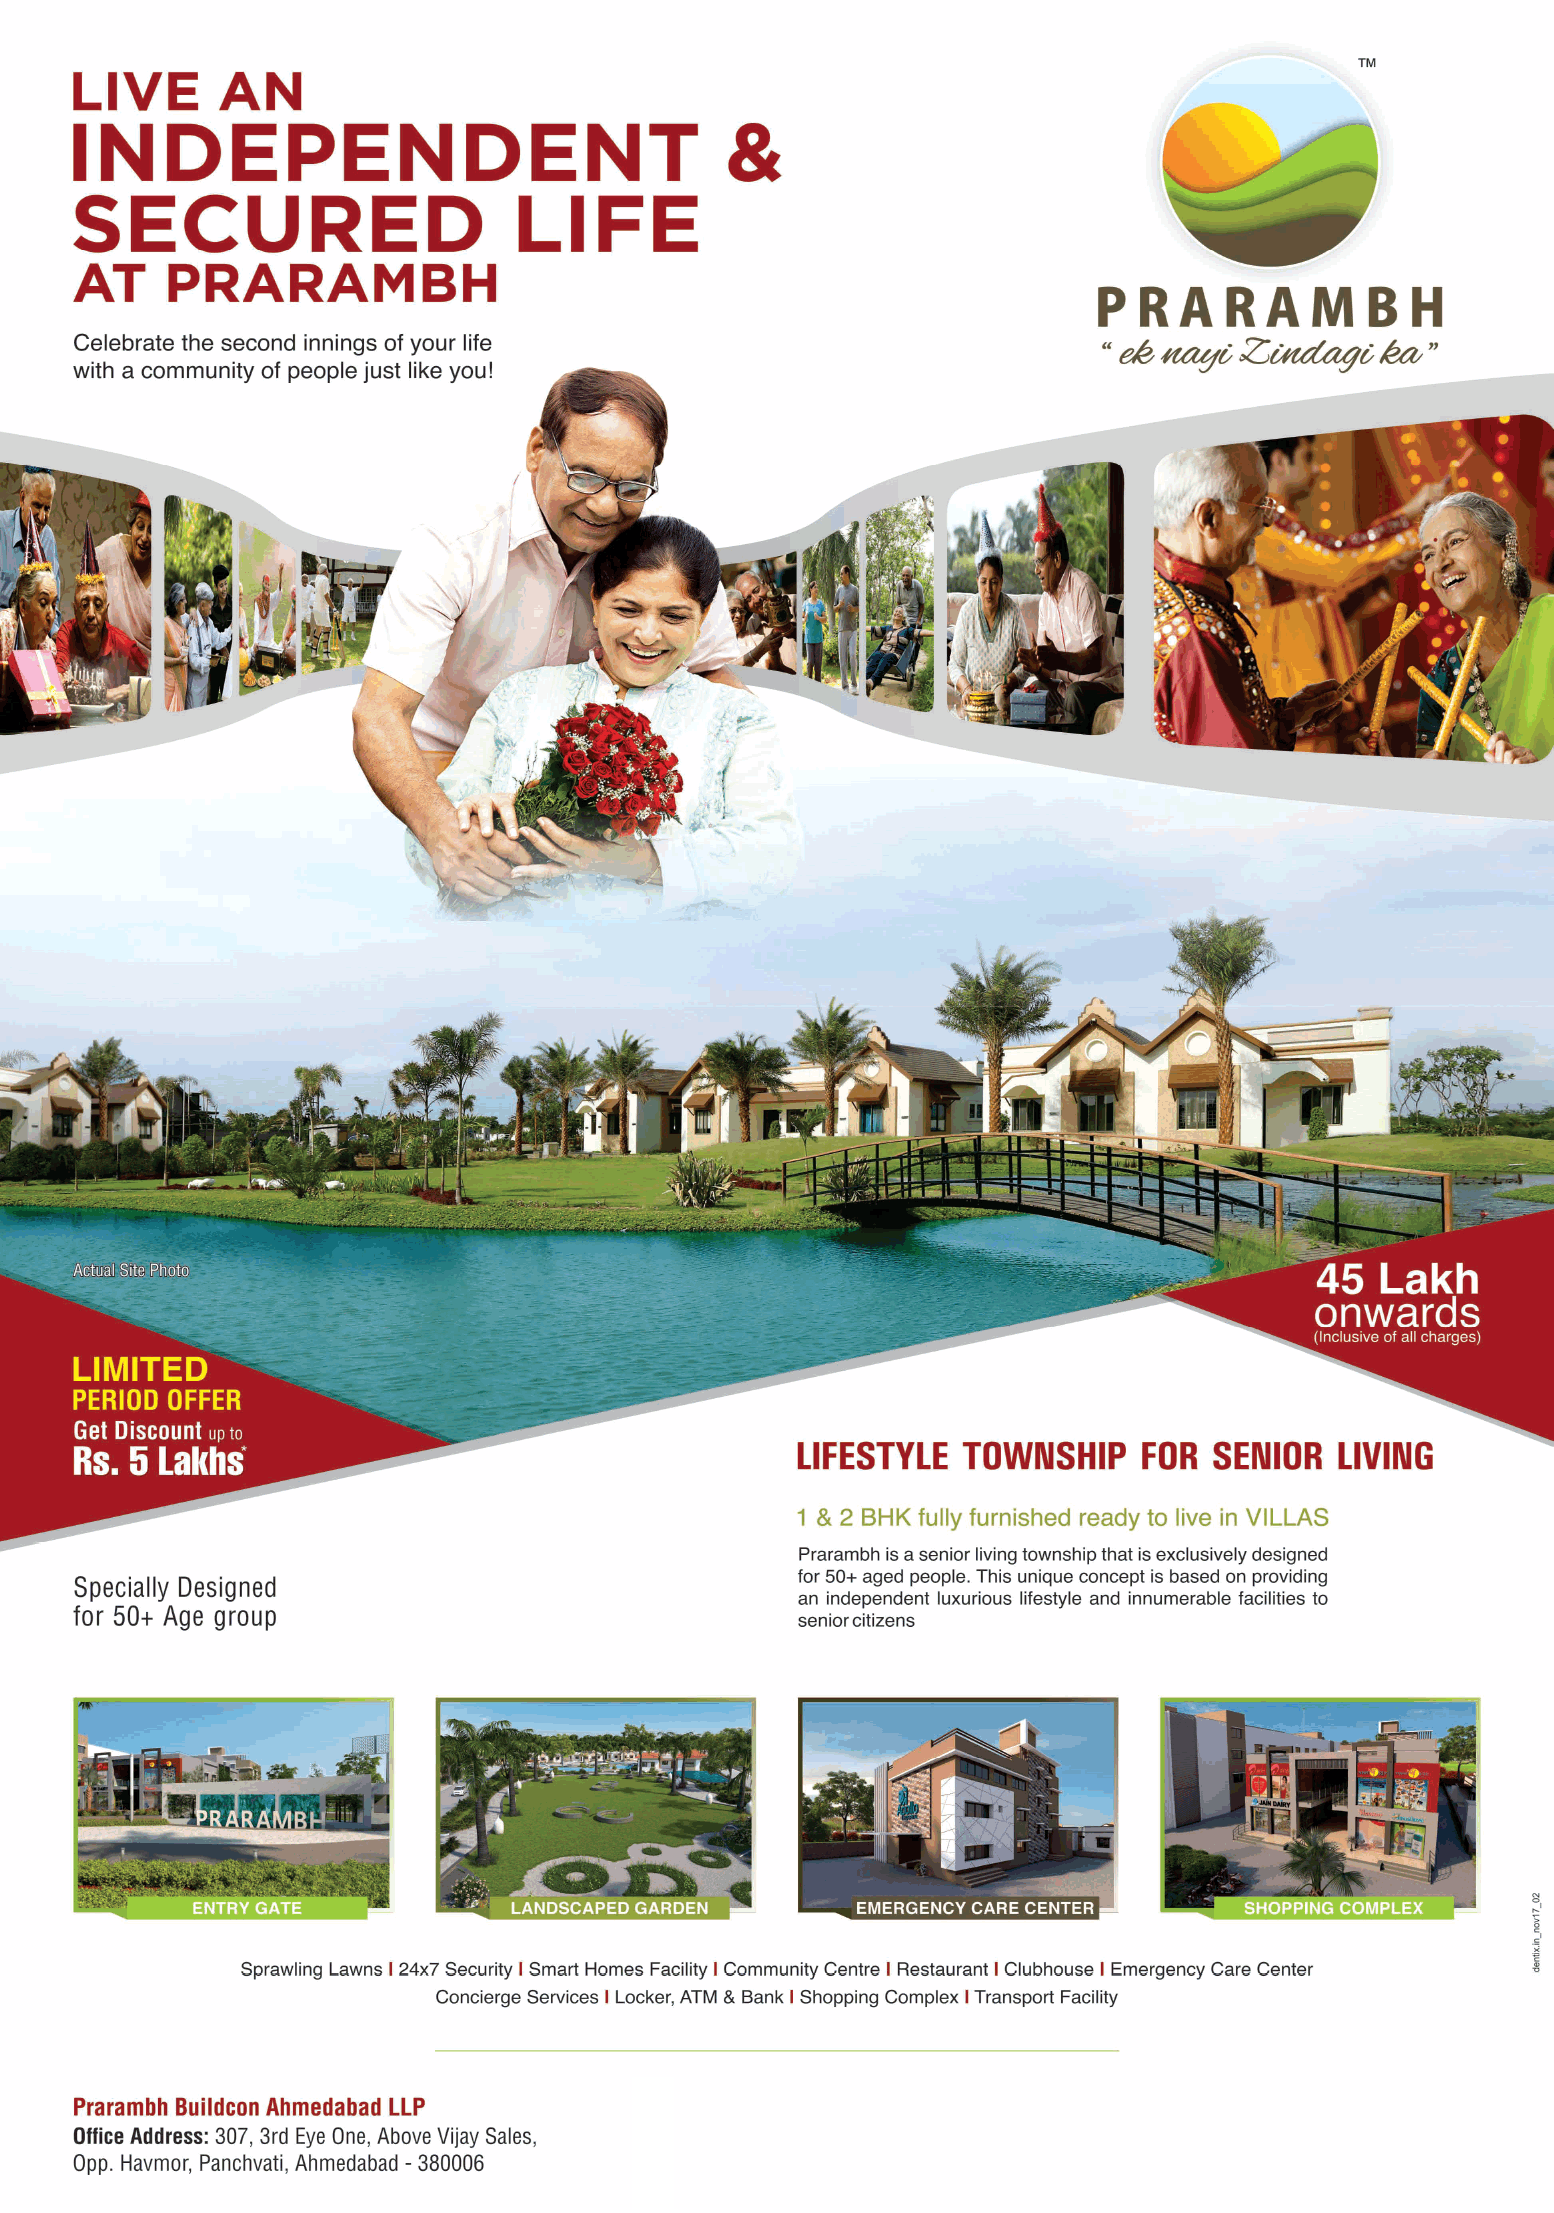 Live an independent and secured life at Prarambh in Ahmedabad Update